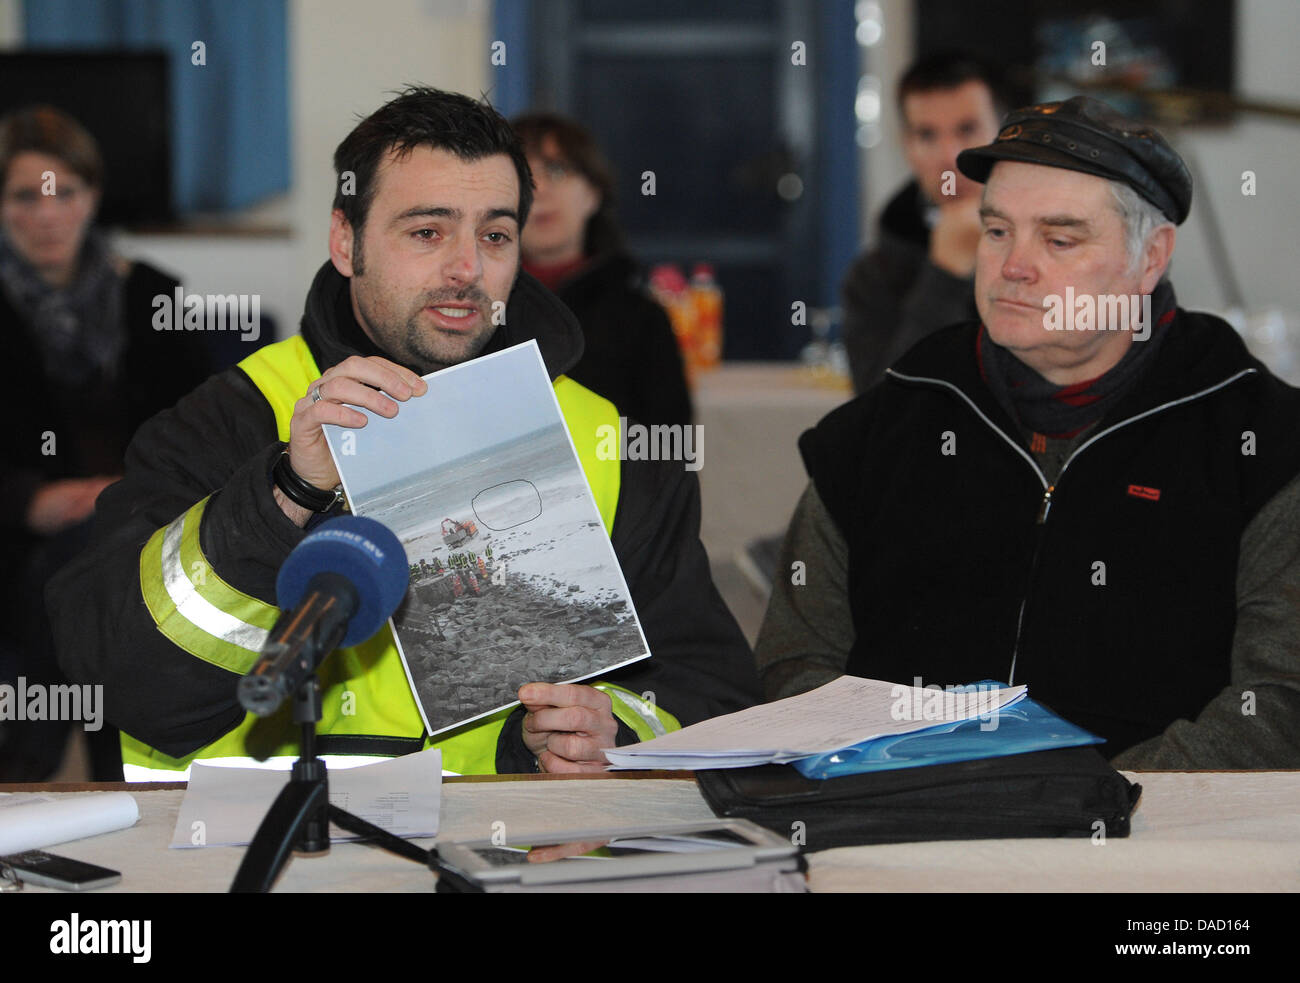 Chief of operations Daniel Hartlieb (L) and mayor of Putgarten, Ernst Heinemann, give a press conference after the search for a girl lost in an accident at the steep coast Kap Arkona at the Baltic Sea was stopped in Putgarten on the island Ruegen, Germany, 30 December 2011. Rescue forces had to stop their search for a ten-year-old girl, who was buried underneath several thousand cu Stock Photo